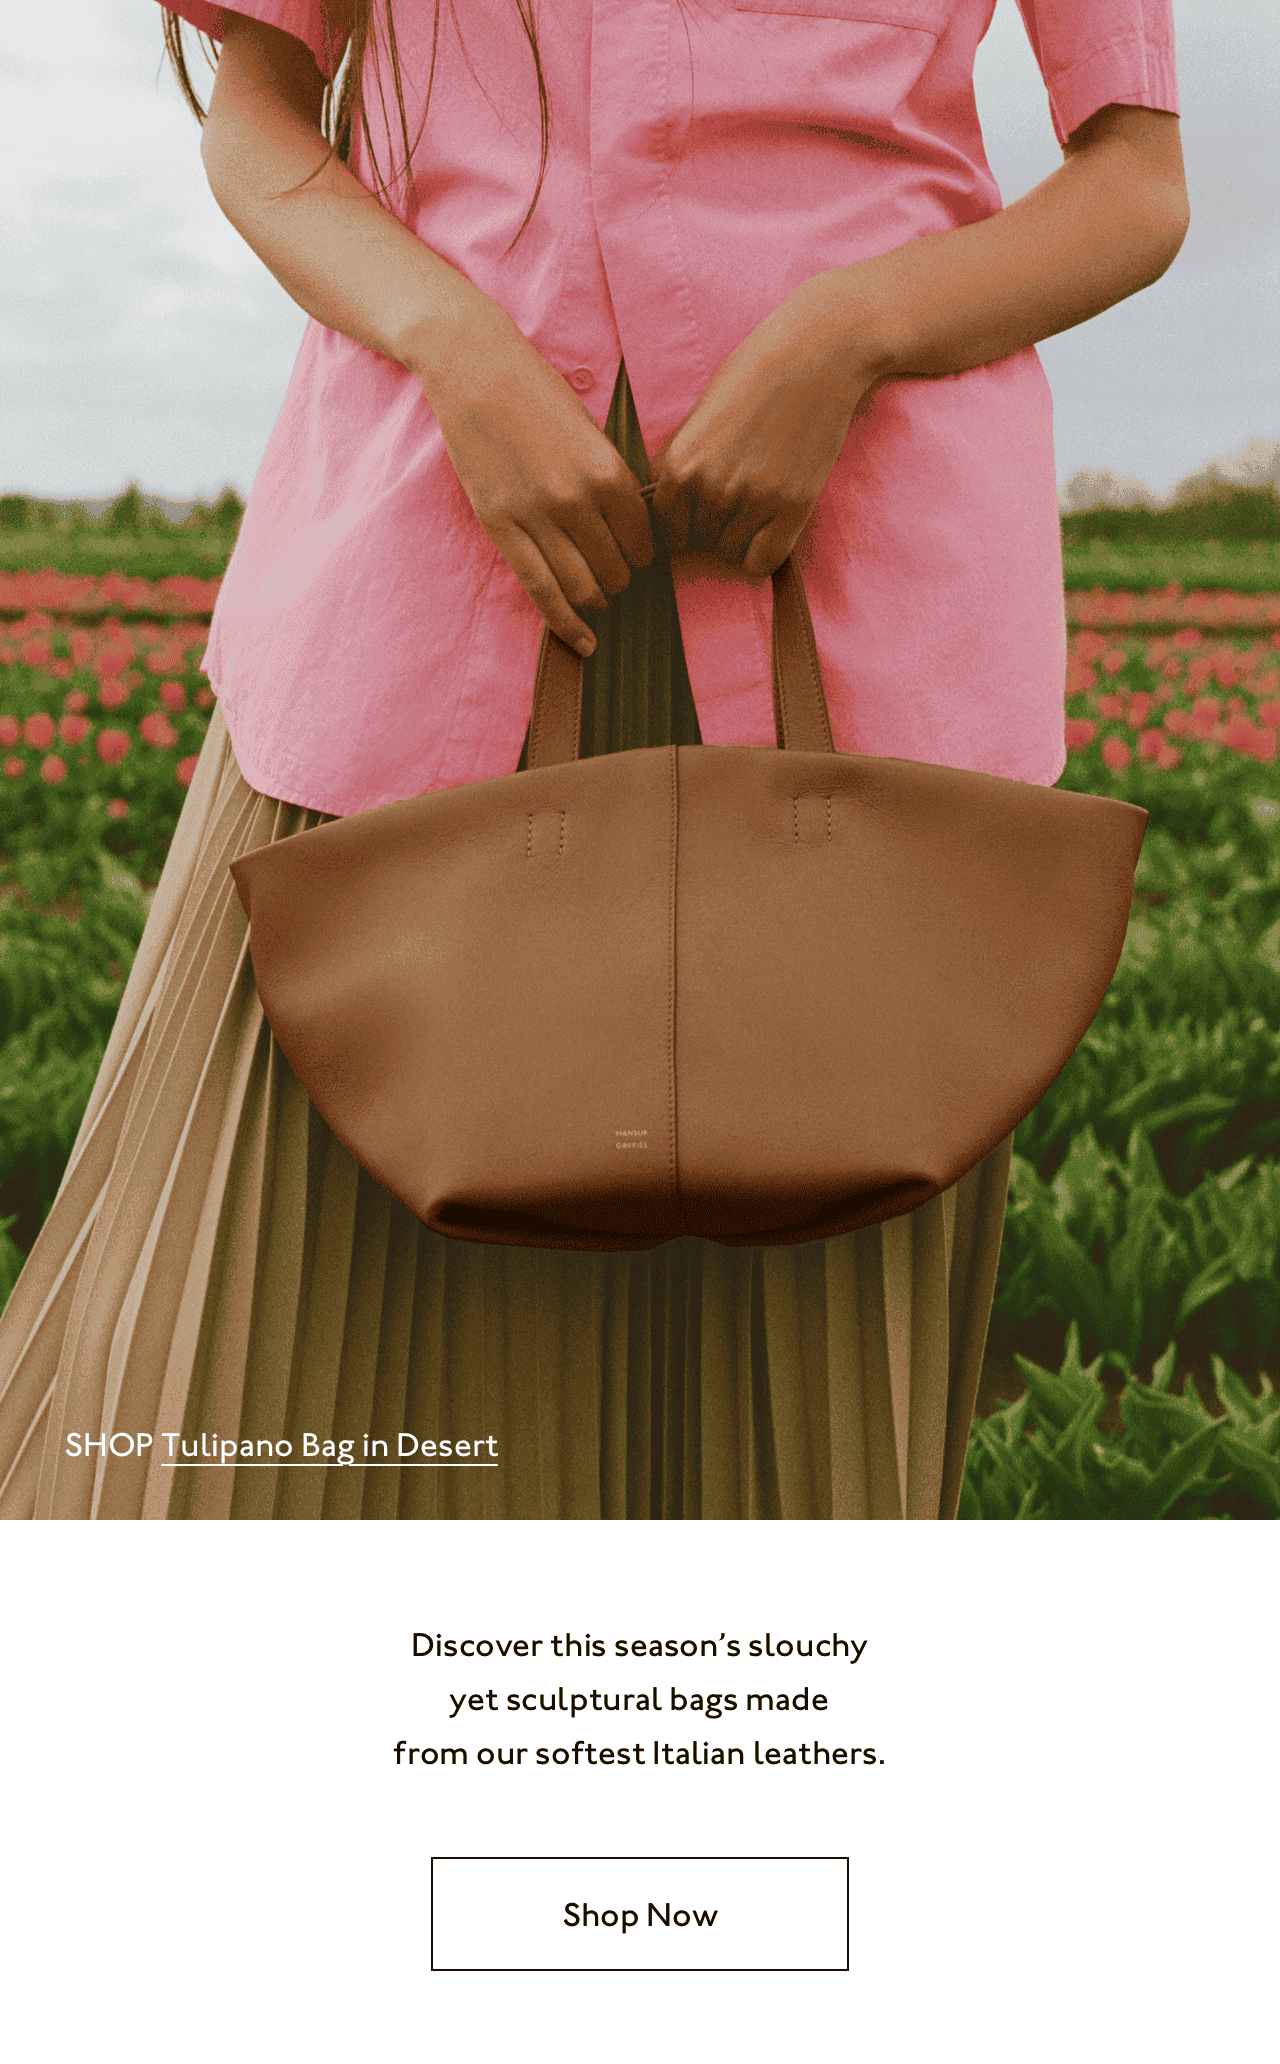 Discover this season's slouchy yet sculptural bags made from our softest Ialian leathers. Shop now.